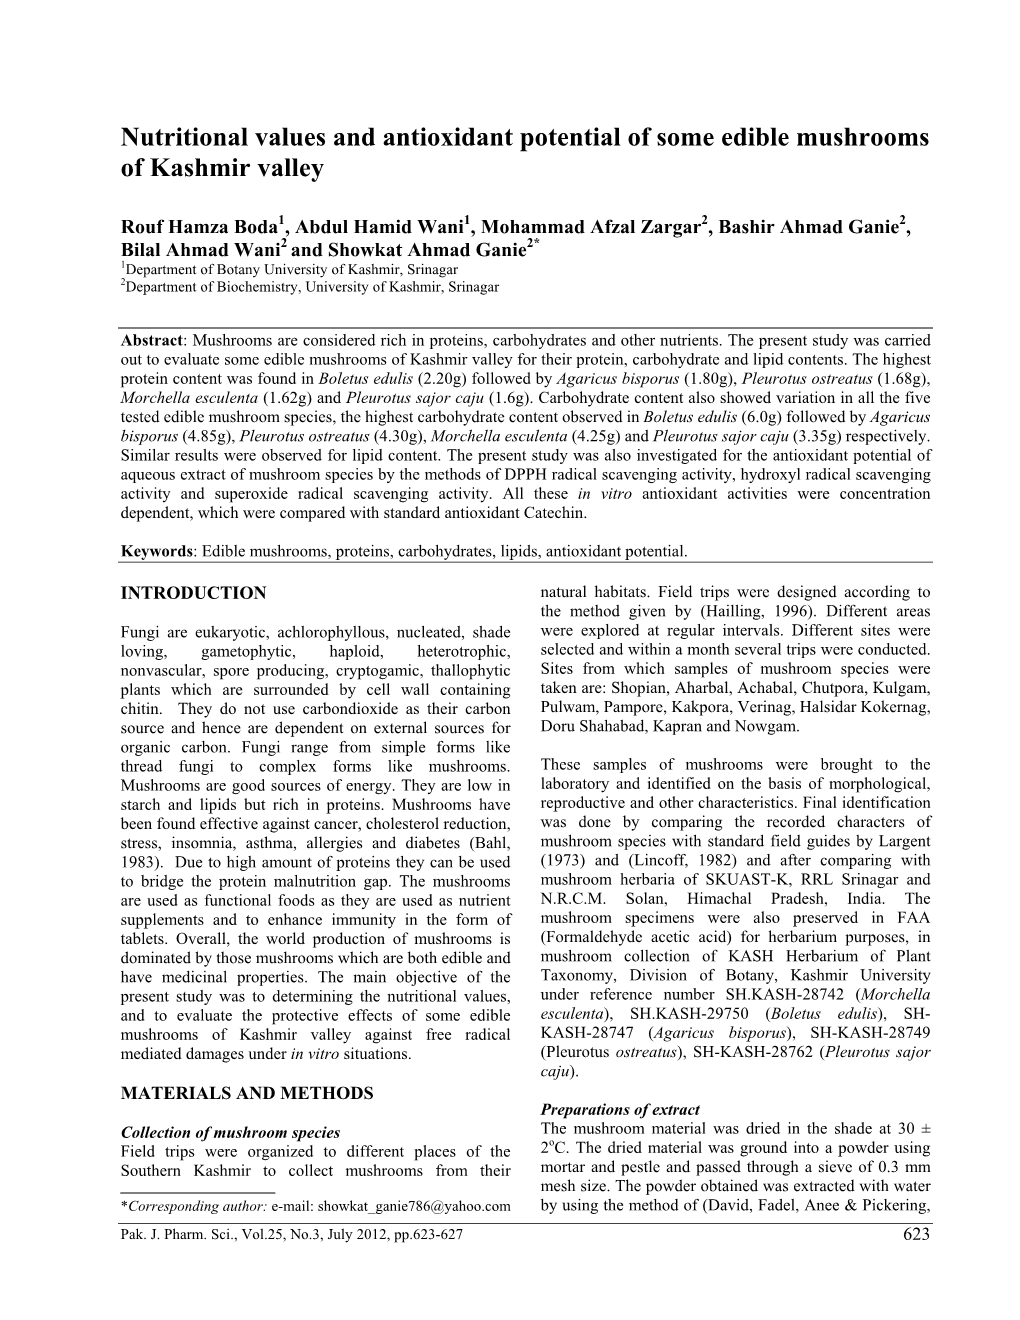 Nutritional Values and Antioxidant Potential of Some Edible Mushrooms of Kashmir Valley